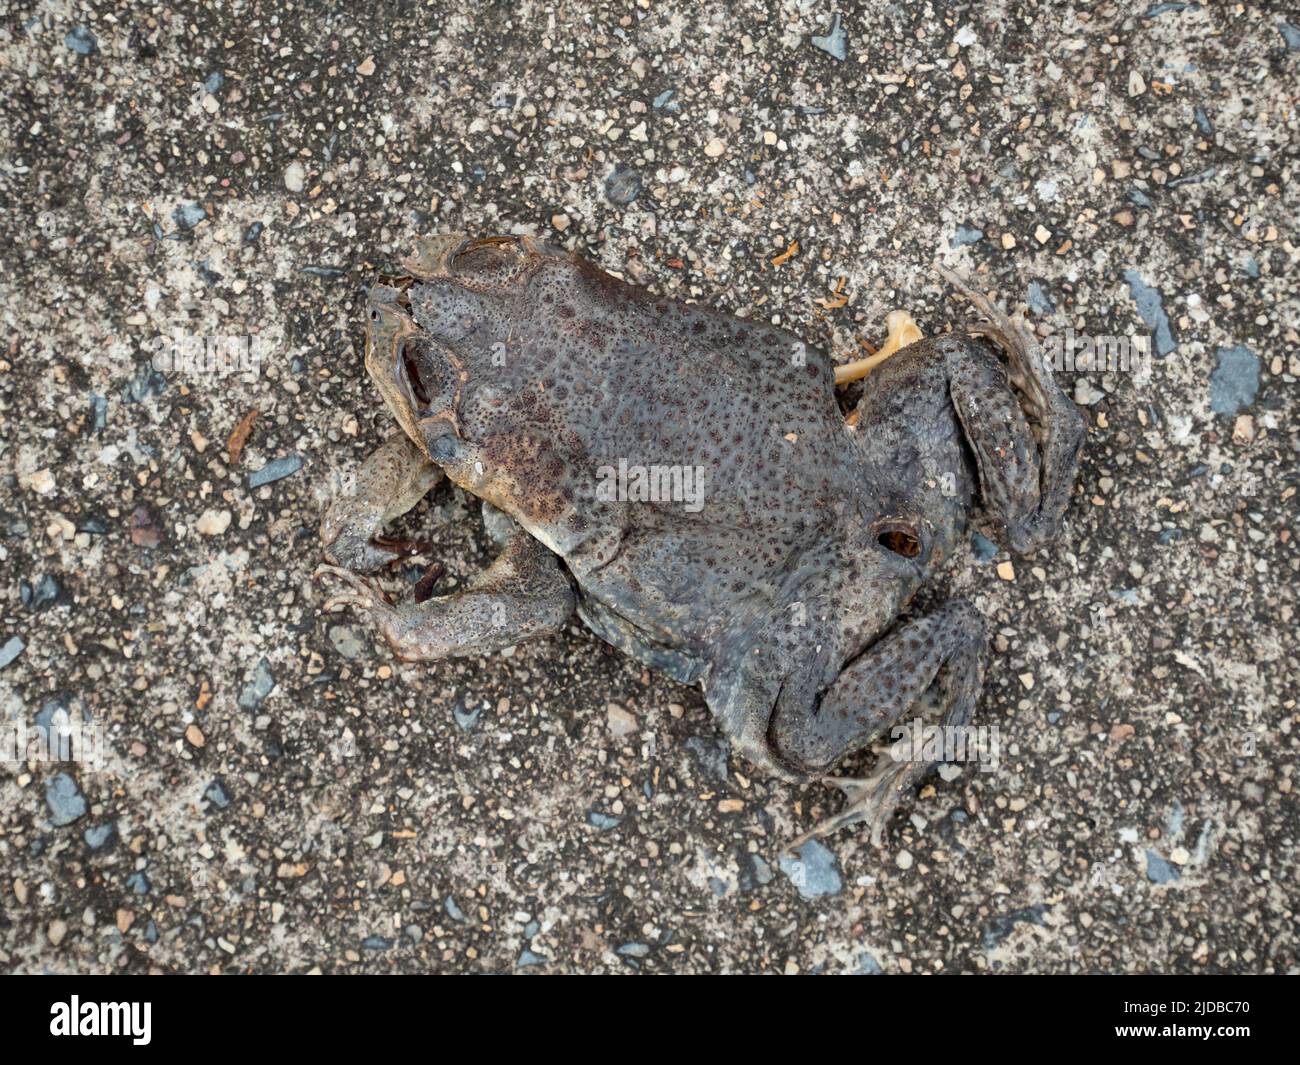 Dead and dried out cane toad, Rhinella marina, on a road in northern Australia Stock Photo